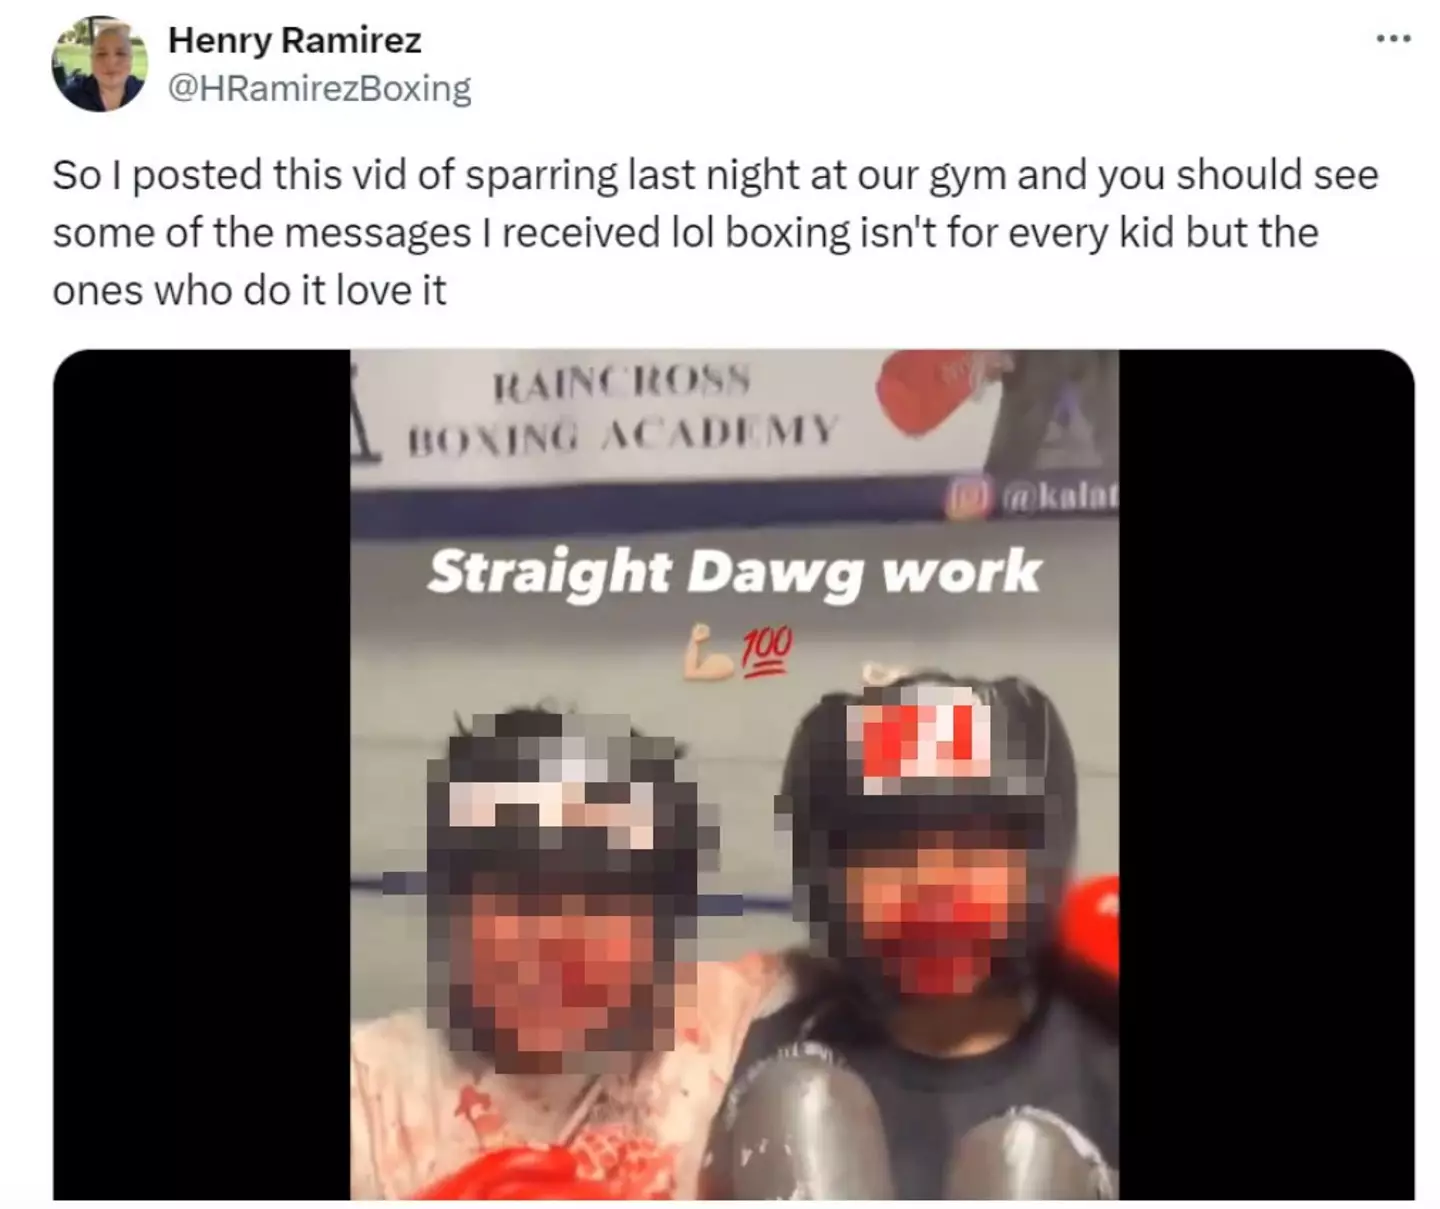 The boxing coach posted a video of the results of a sparring match between a nine and 10-year-old with blood on their faces.